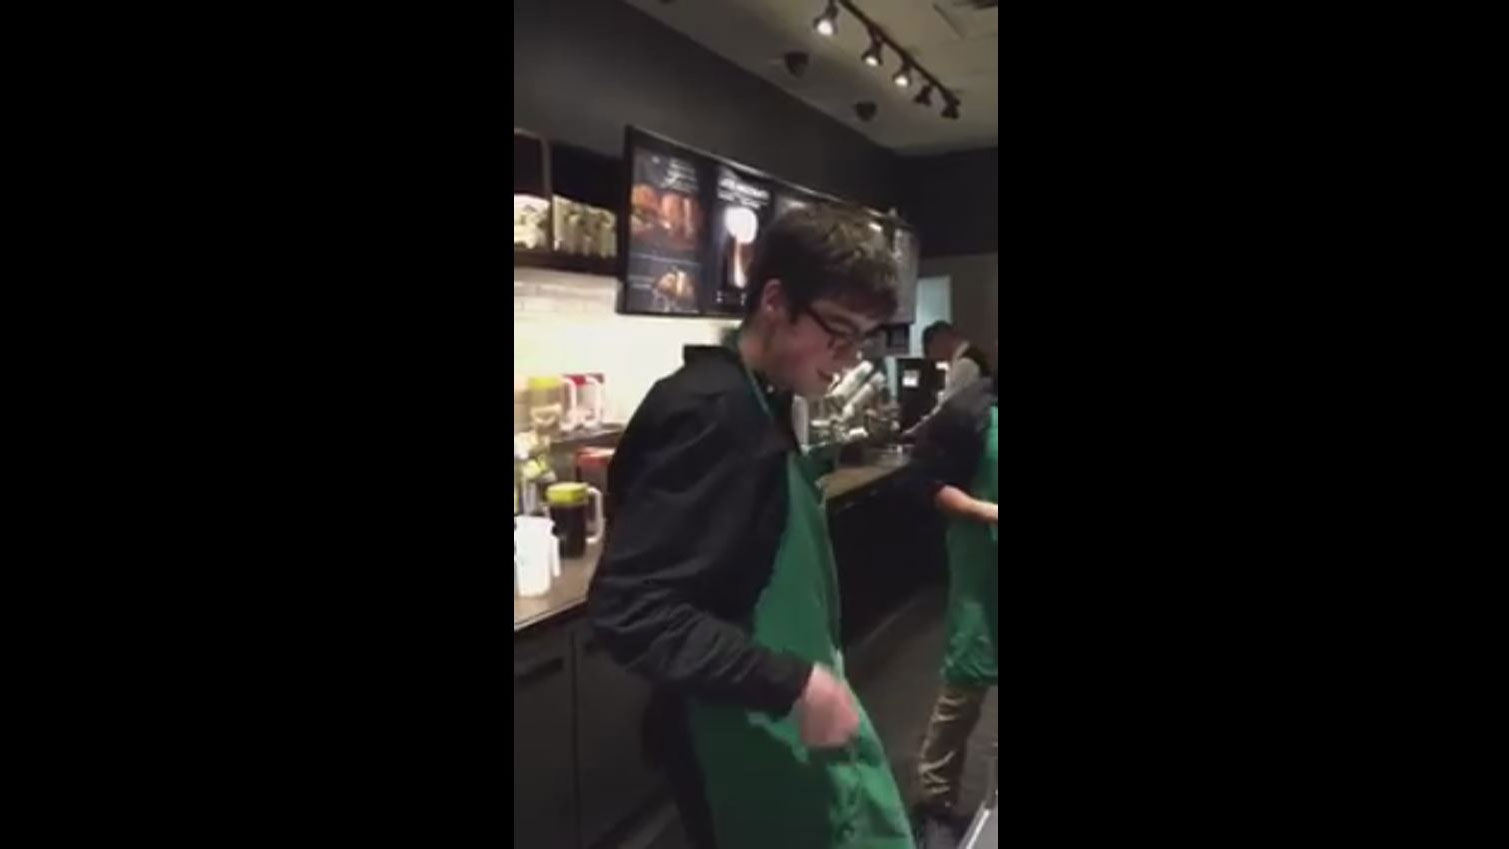 Trending: Toronto barista with autism charms customers with dance moves